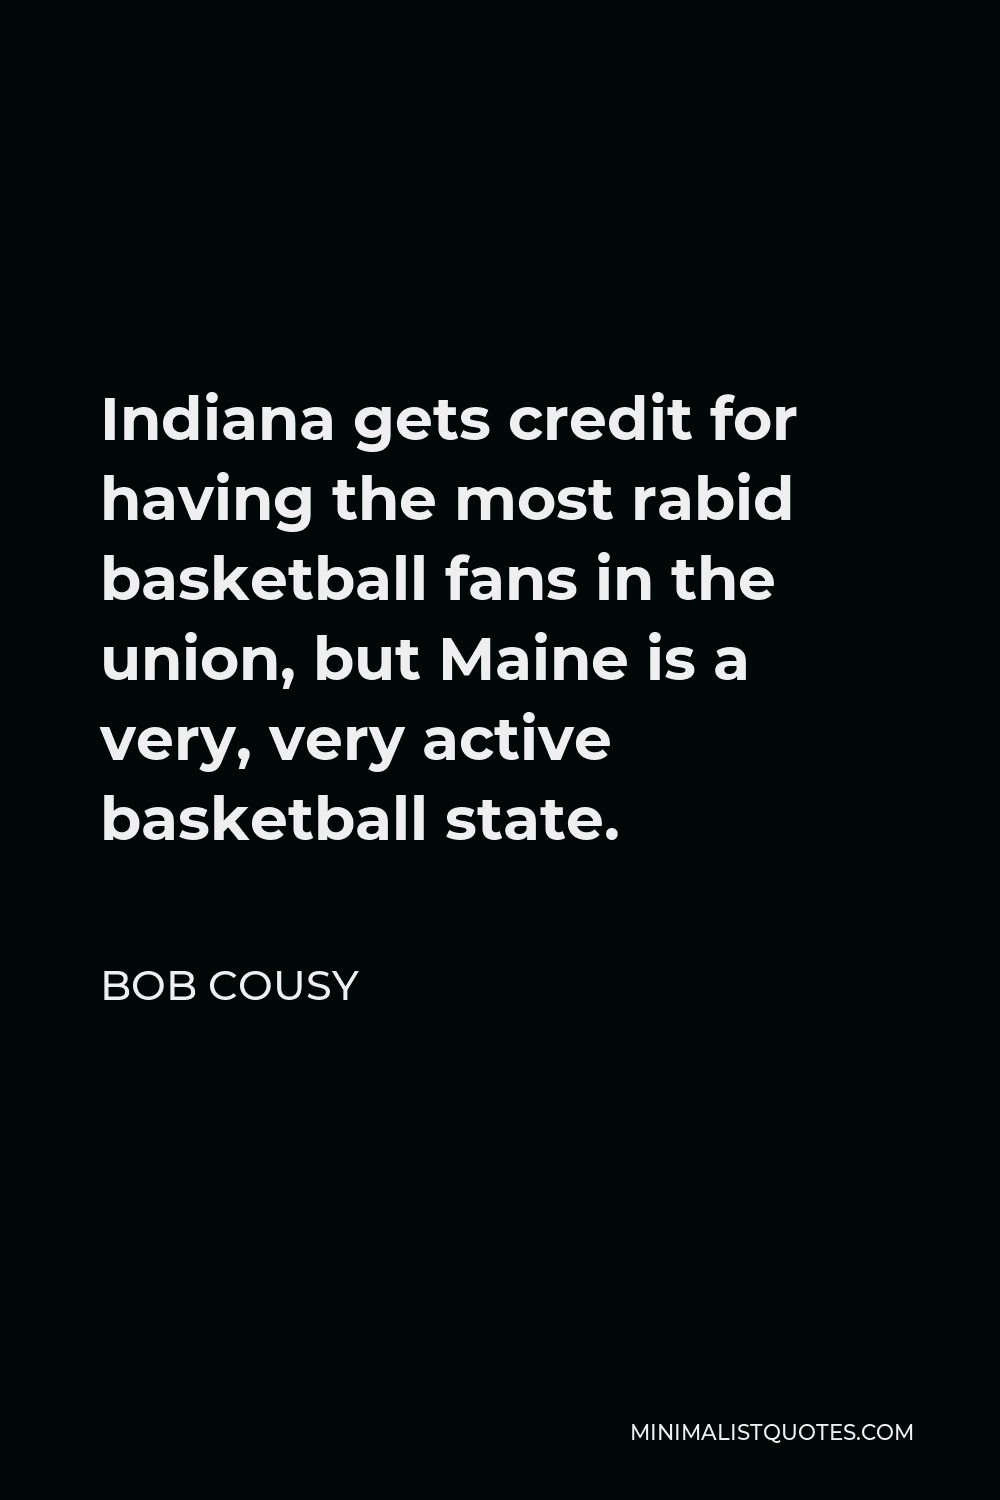 Bob Cousy Quote - Indiana gets credit for having the most rabid basketball fans in the union, but Maine is a very, very active basketball state.